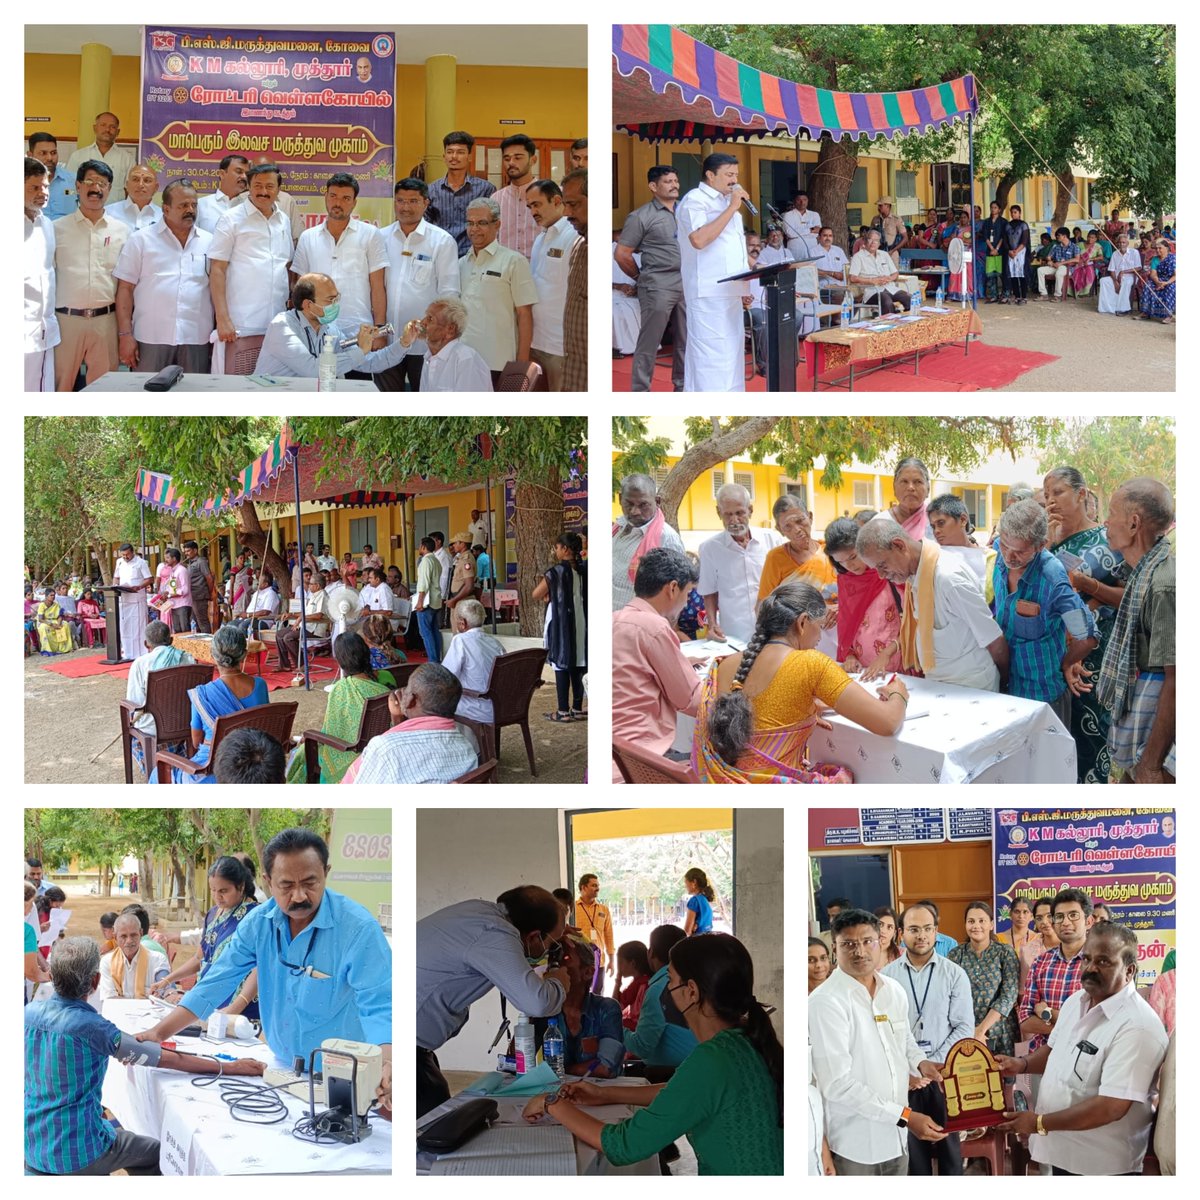 Free Medical camp conducted by PSG Hospitals  @ Muthur on 30.04.2023, Around 125+ people got benefited from this medical camp. #PSG #PSGHospitals #psgimsr #psgsuperspeciality #Medicalcamp #coimbatoredistrict #Tamilnadu #healthcamp